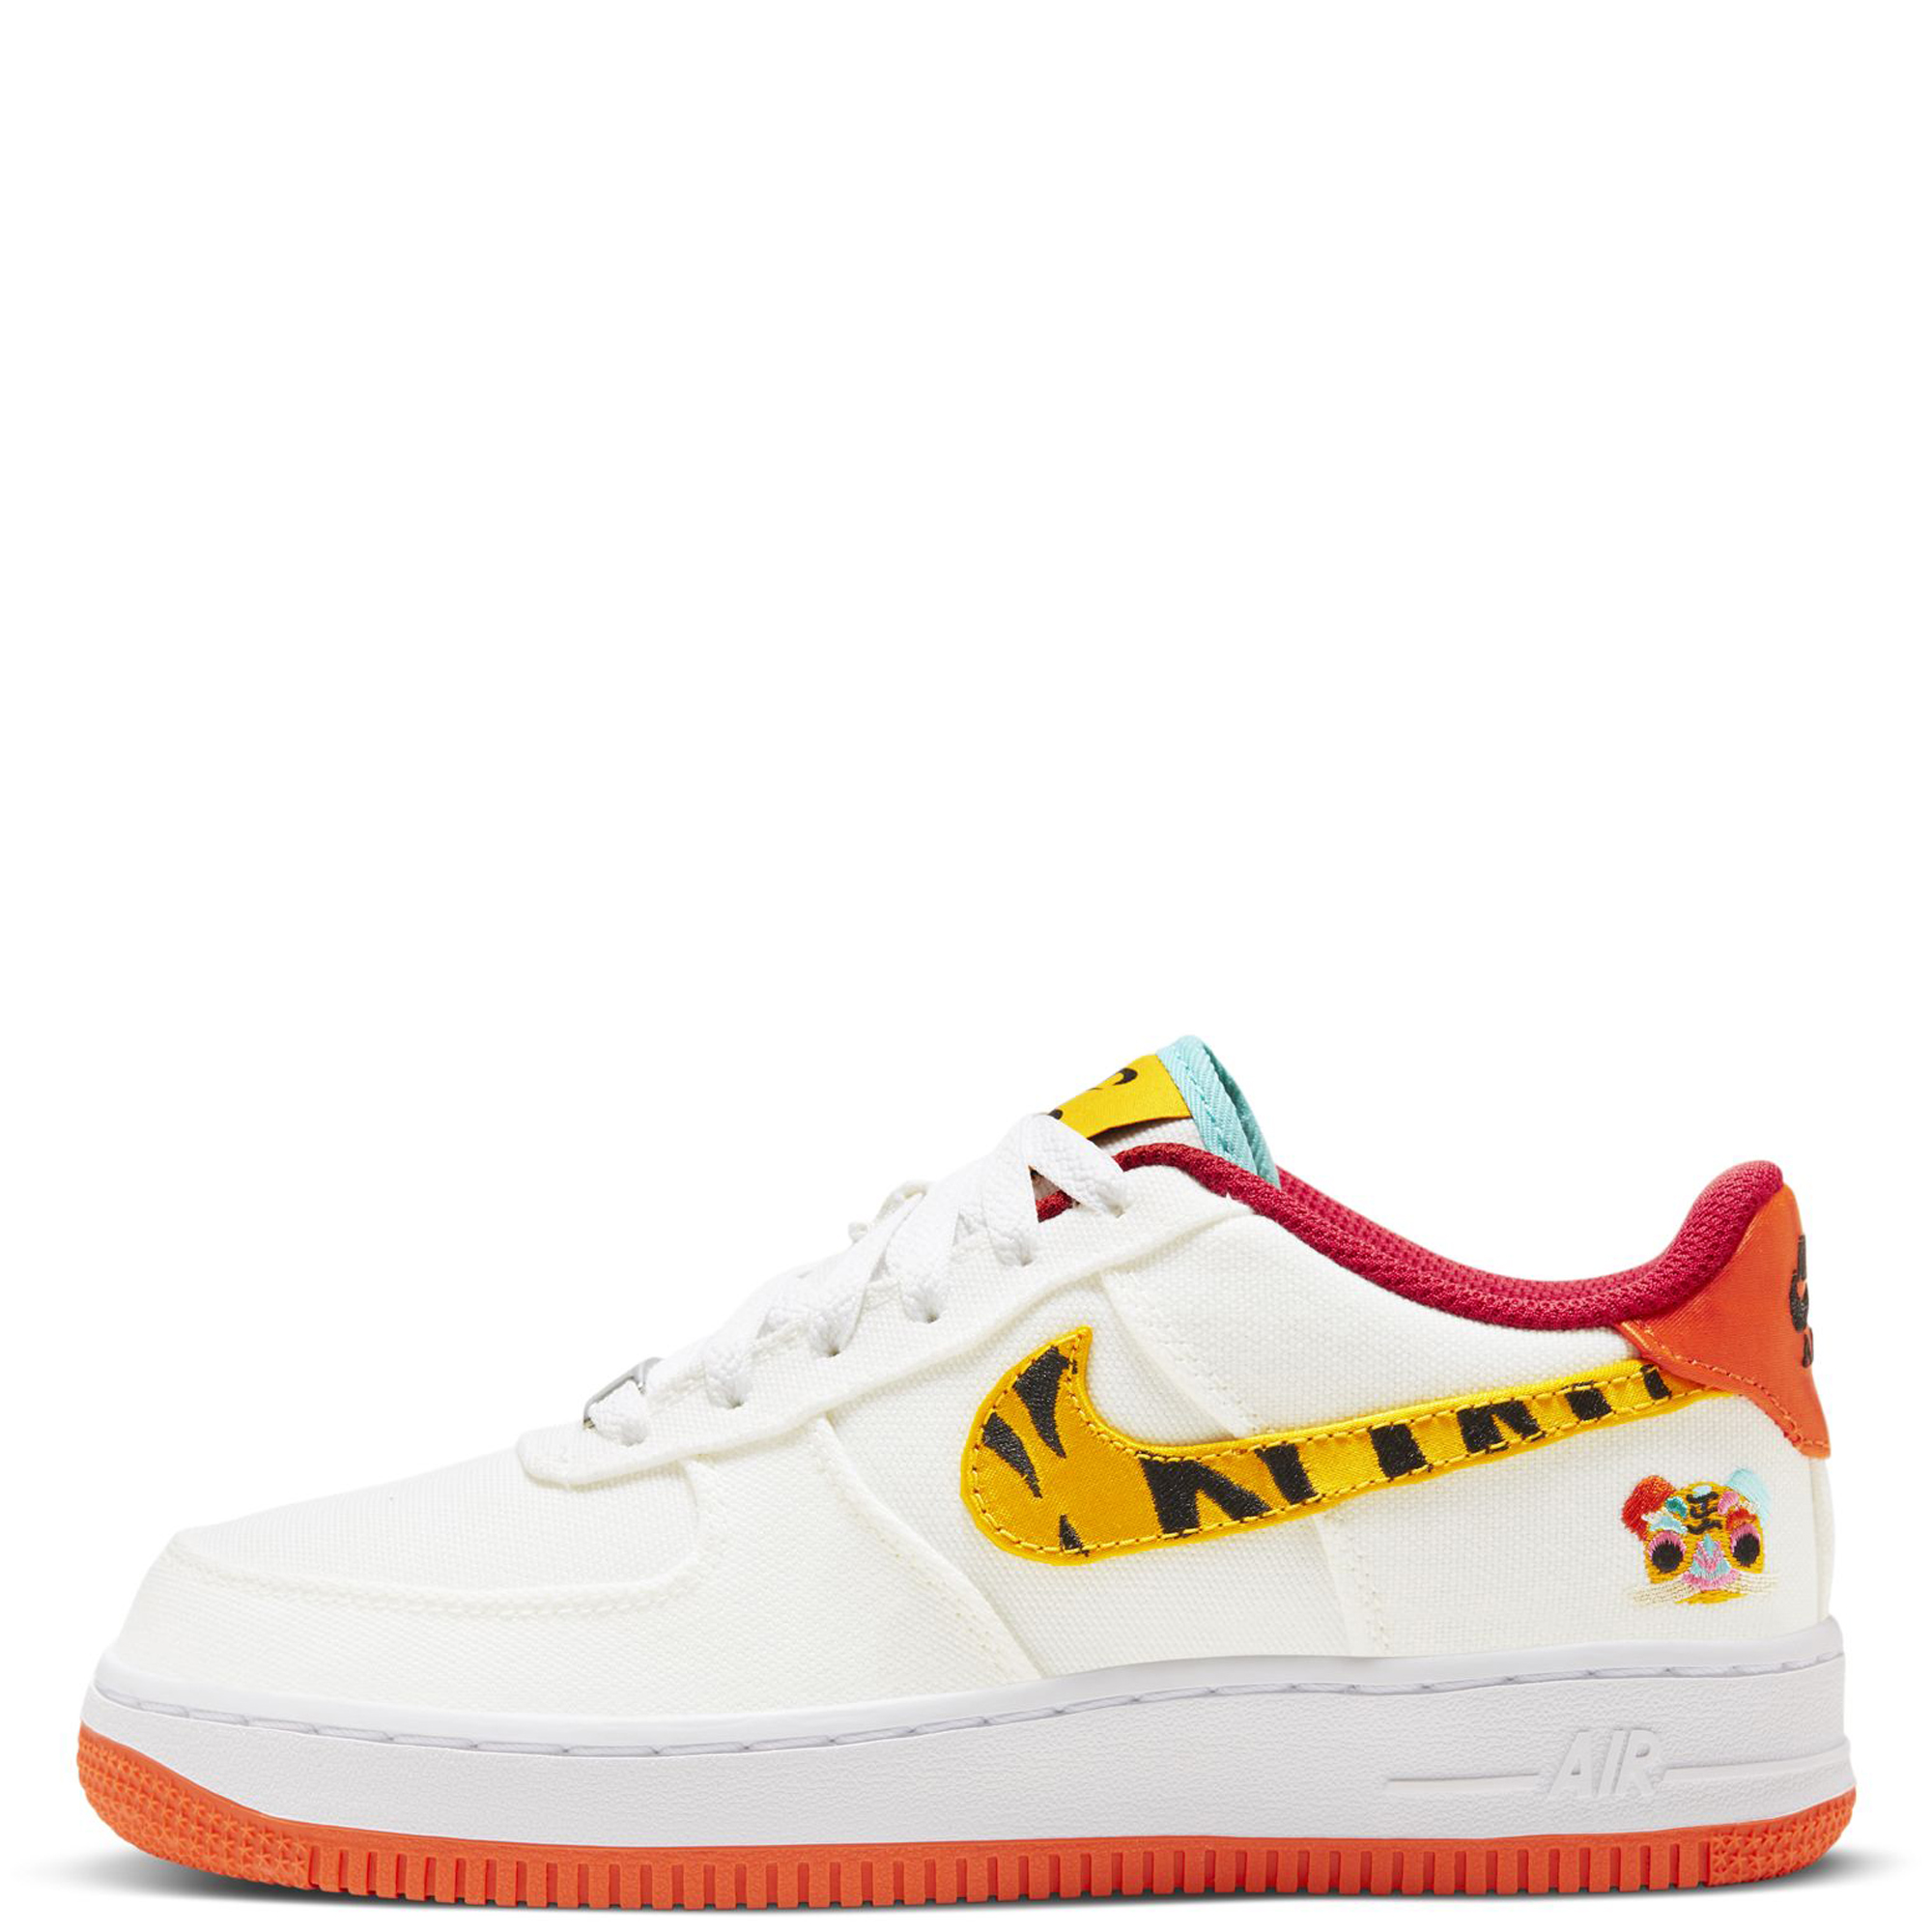 Nike Air Force 1 LV8 (GS) in White - Size 7